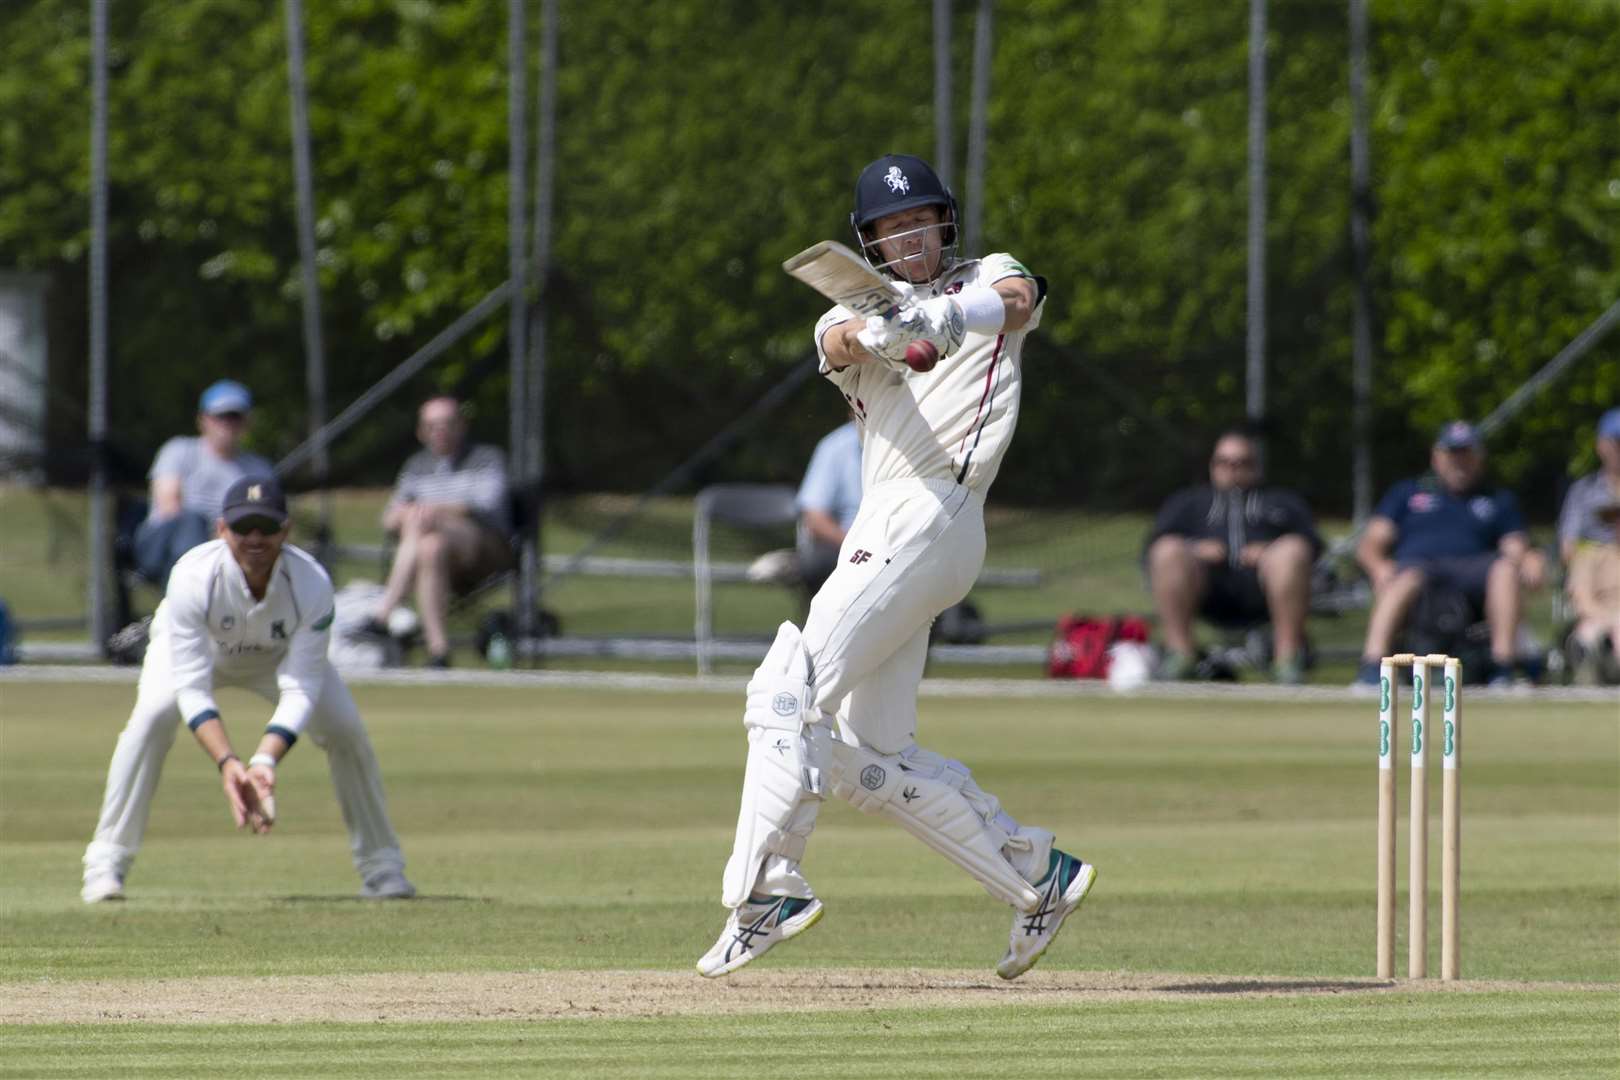 Joe Denly hits a four to bring up his 50 in the game against Warwickshire in Tunbridge Wells last season